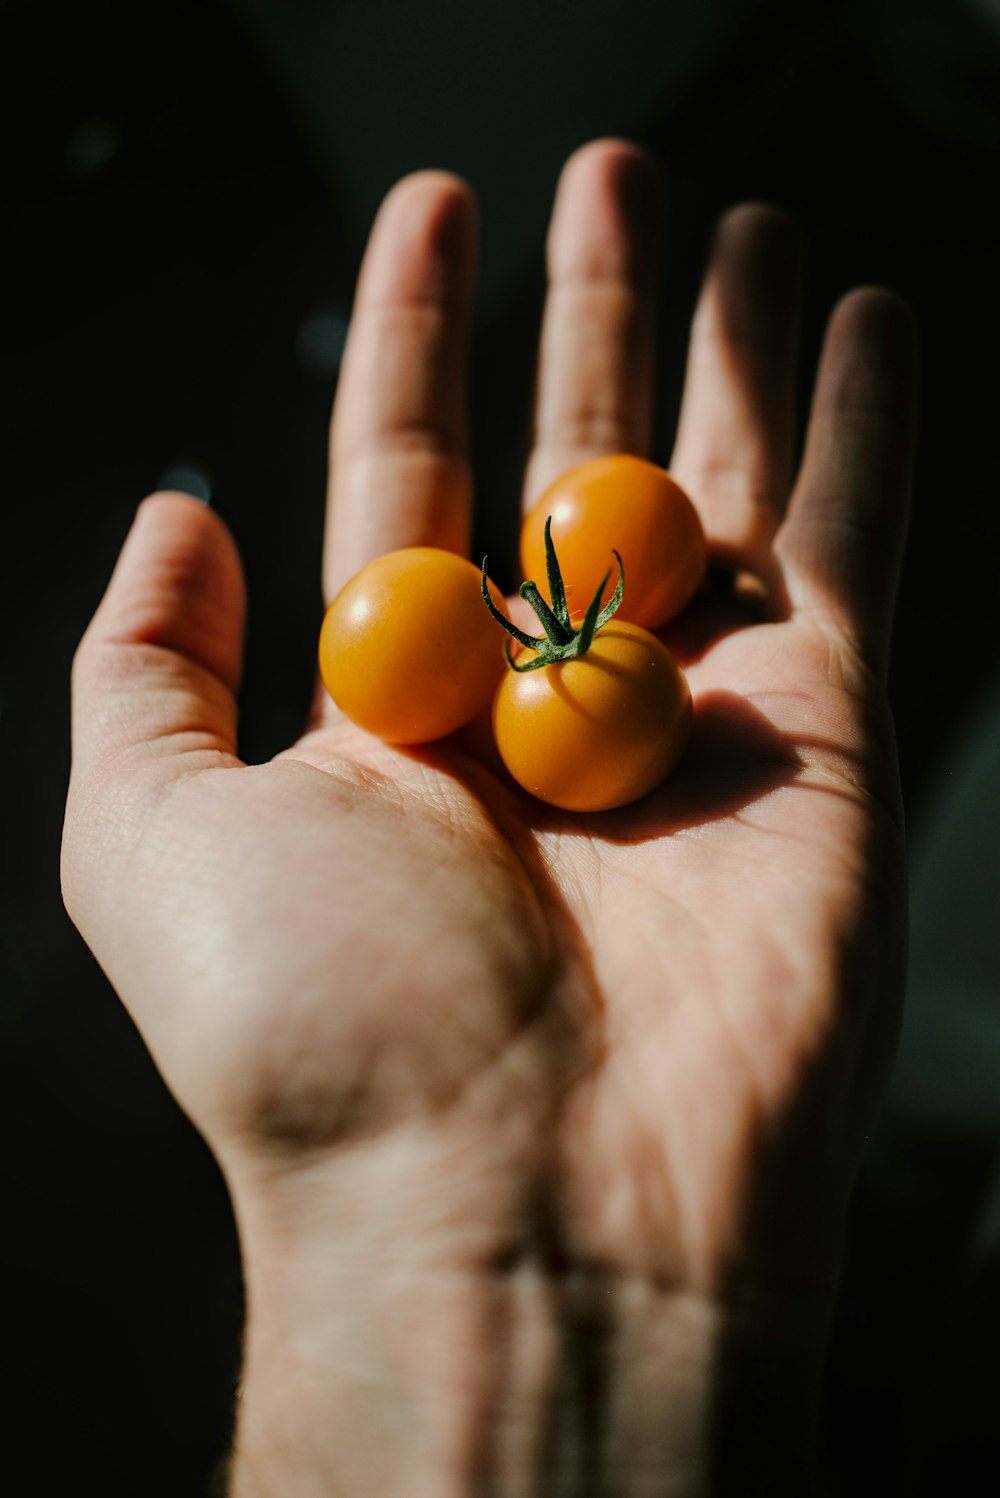 a hand holding small yellow tomatoes